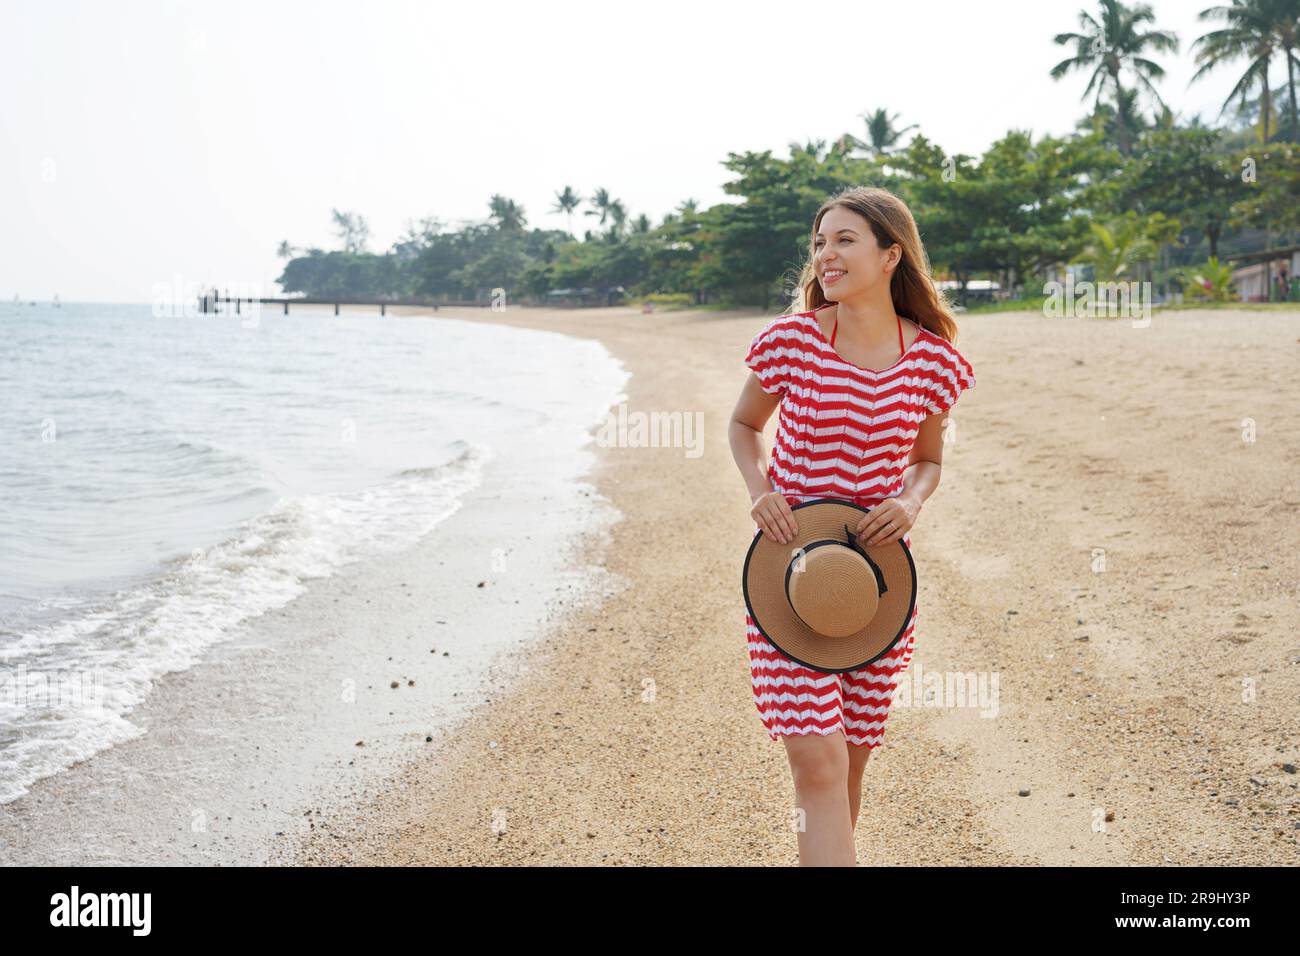 Traveler girl on empty tropical beach. Young woman walking relaxed on sand beach in Brazil. Escape travel concept. Stock Photo